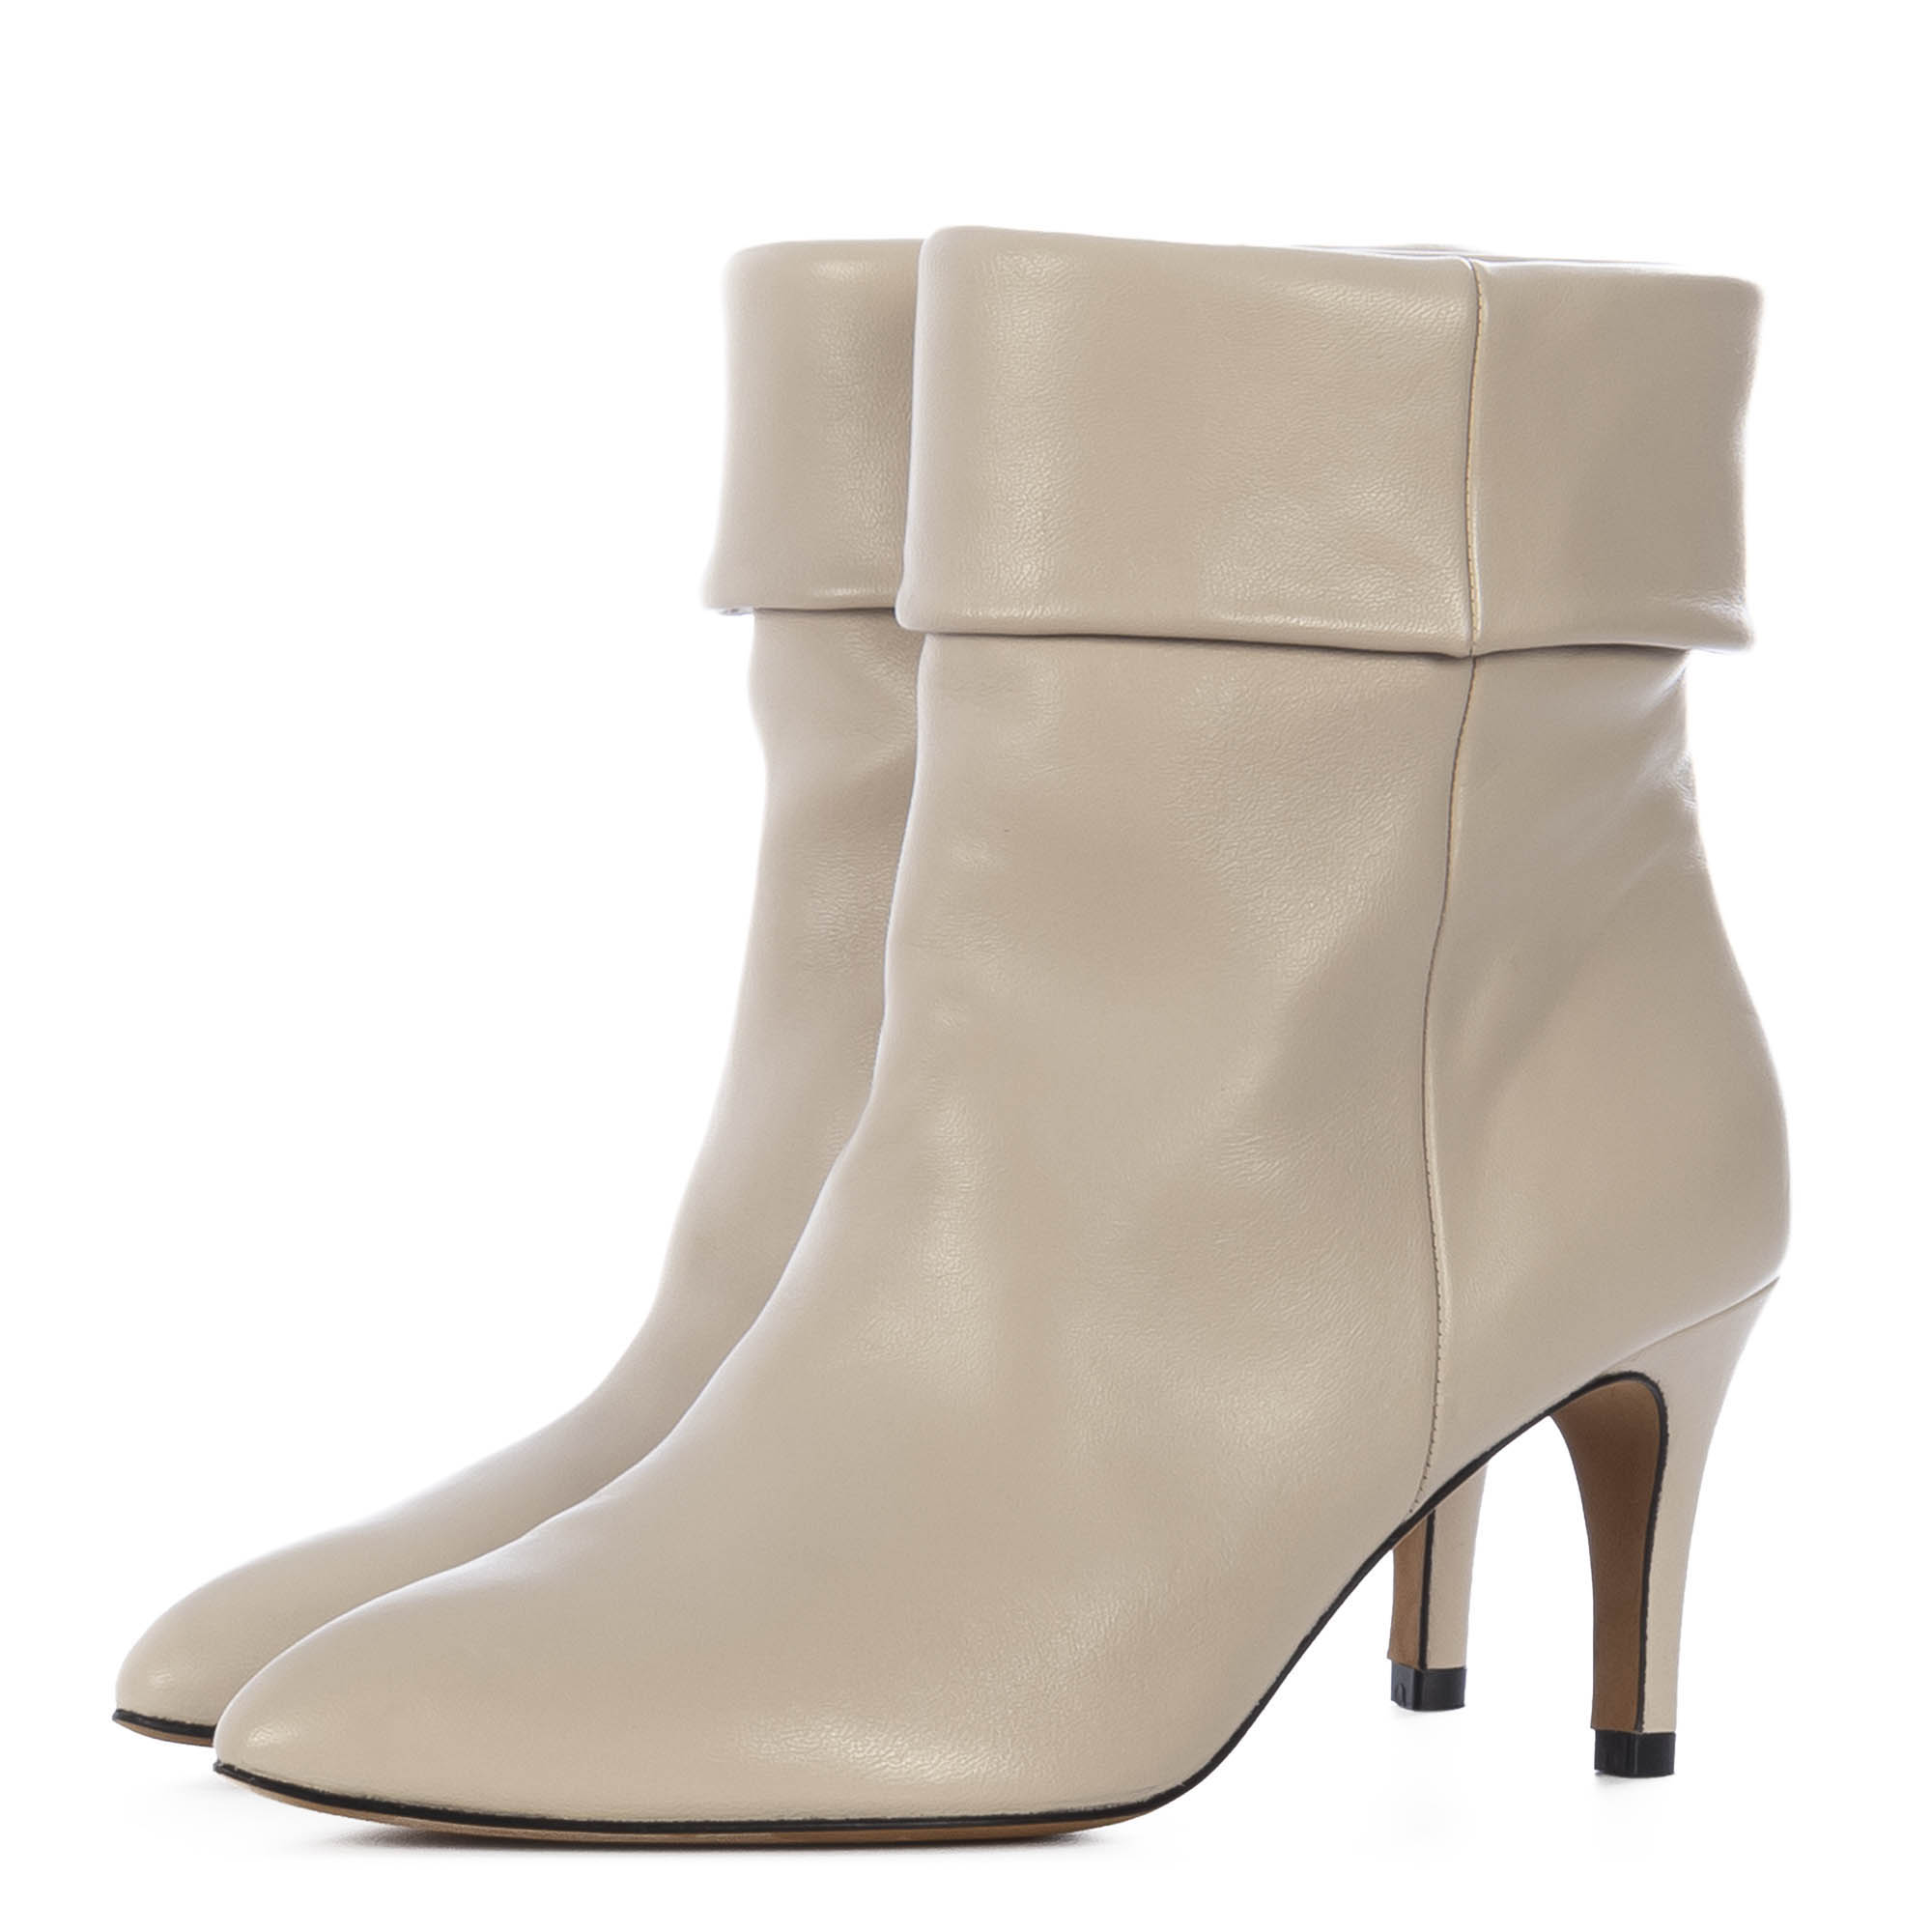 CREAM-COLORED ANKLE BOOTS